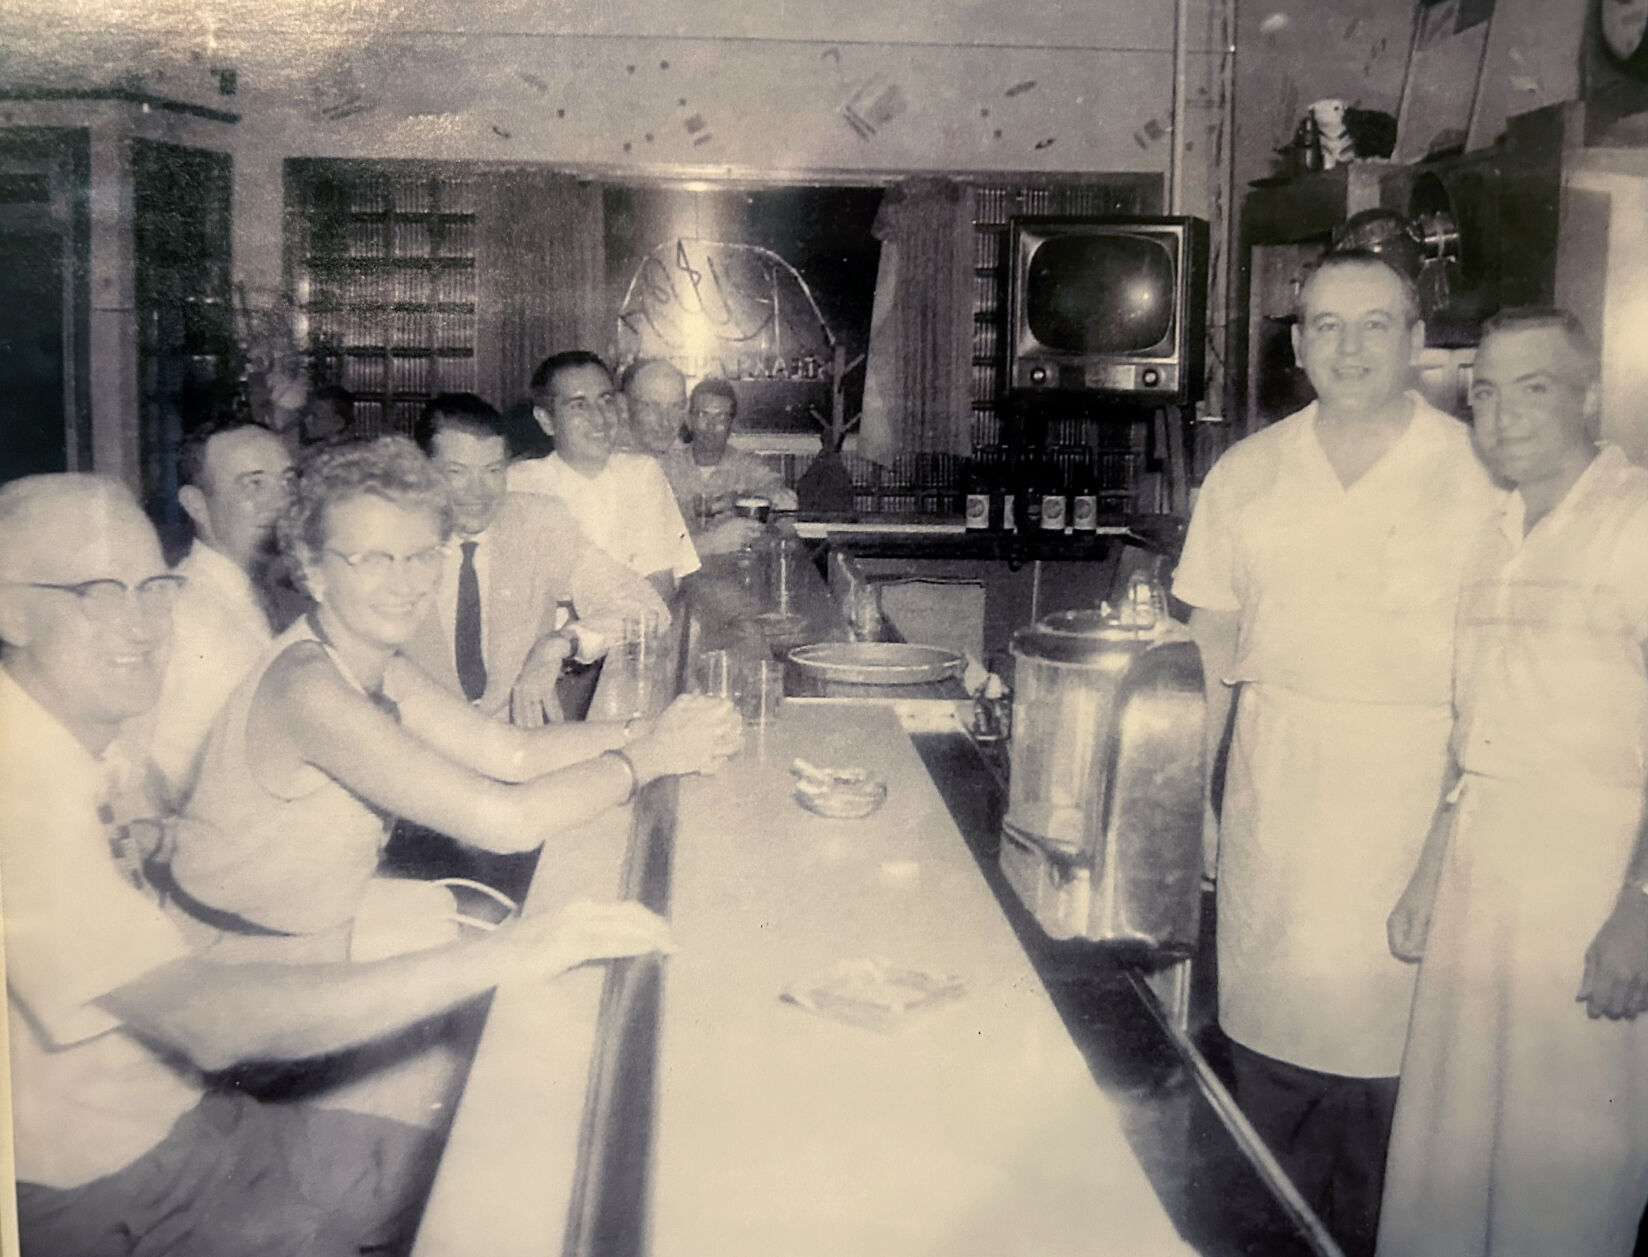 Frederick “Fritz” Willenborg (second from right), established The Ritz in 1948 and operated it until his retirement in 1975.    PHOTO CREDIT: Contributed